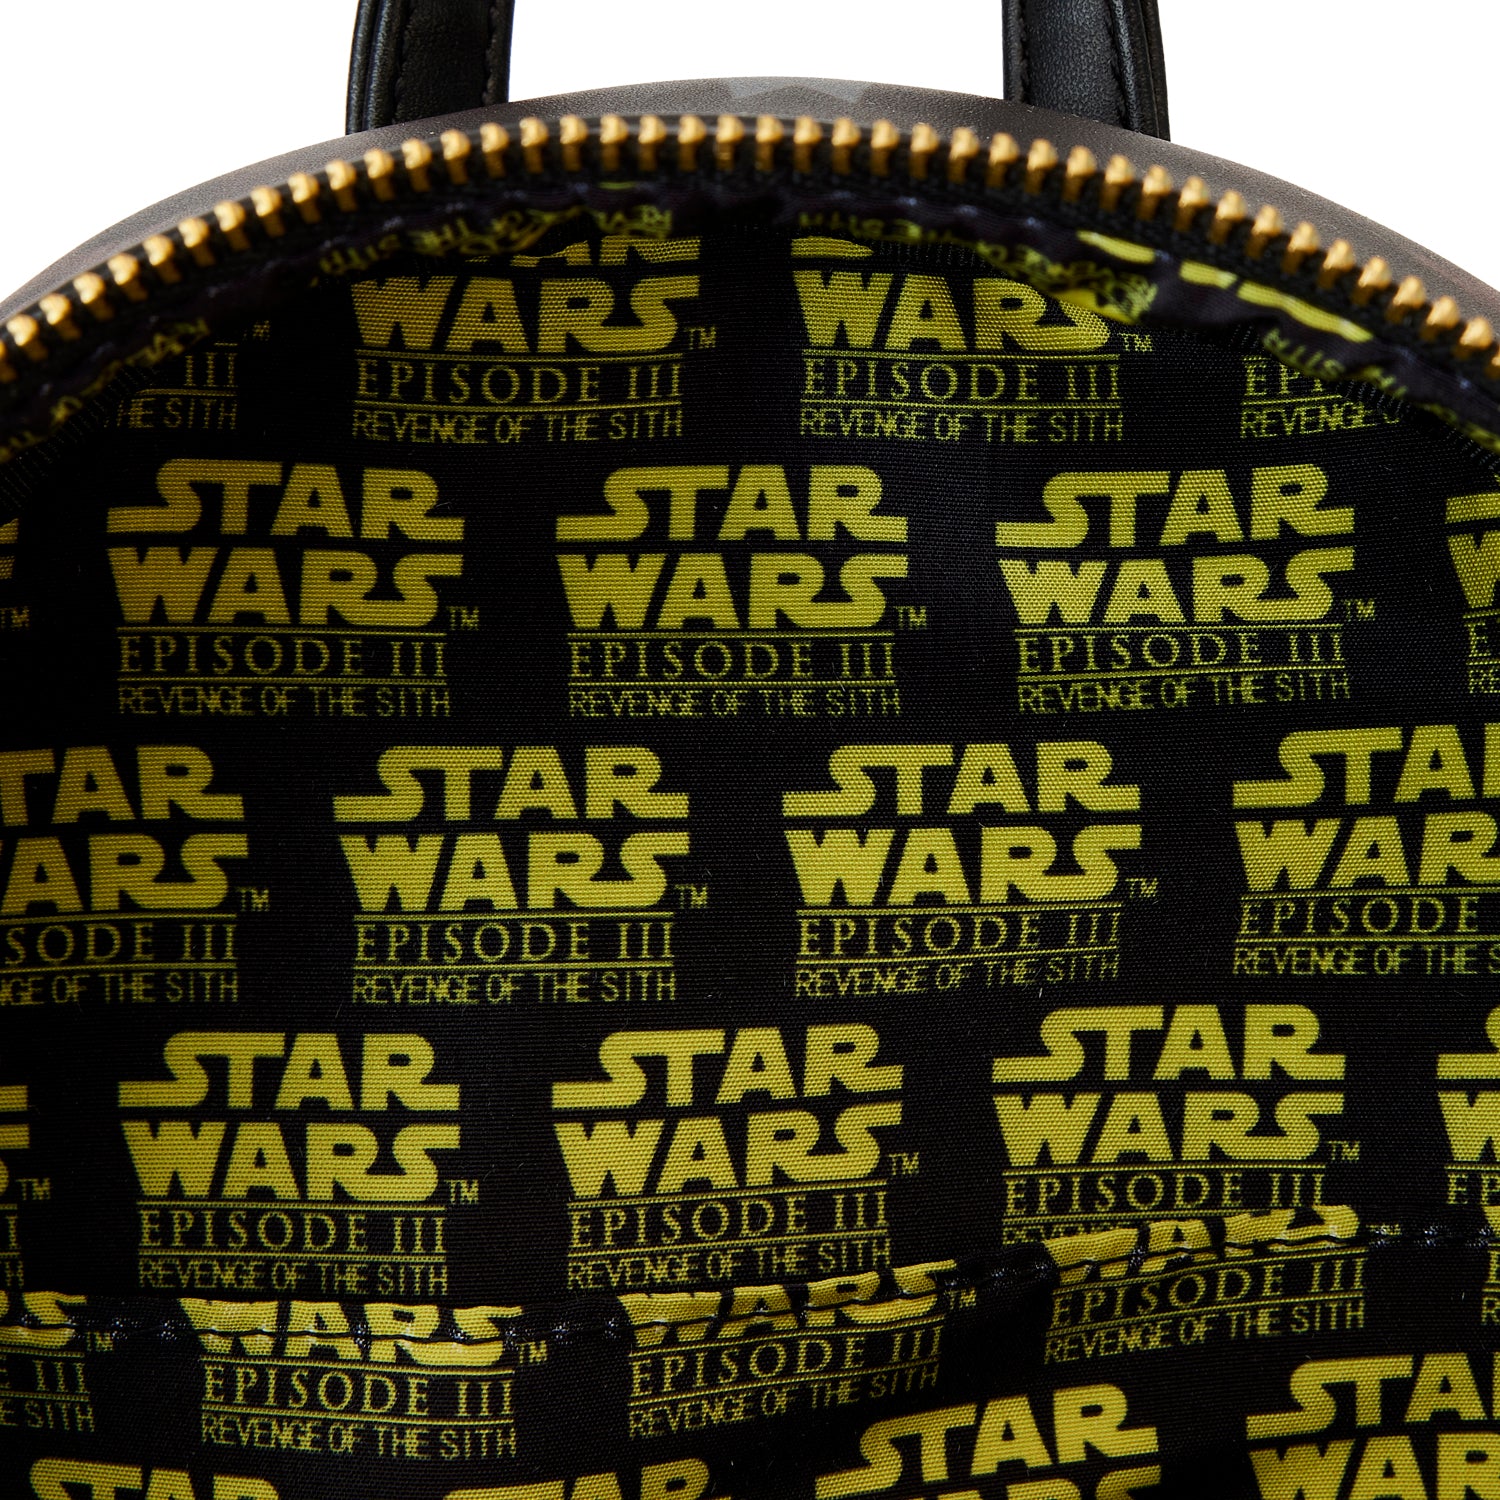 Loungefly x Star Wars Scenes Revenge Of The Sith Mini Backpack